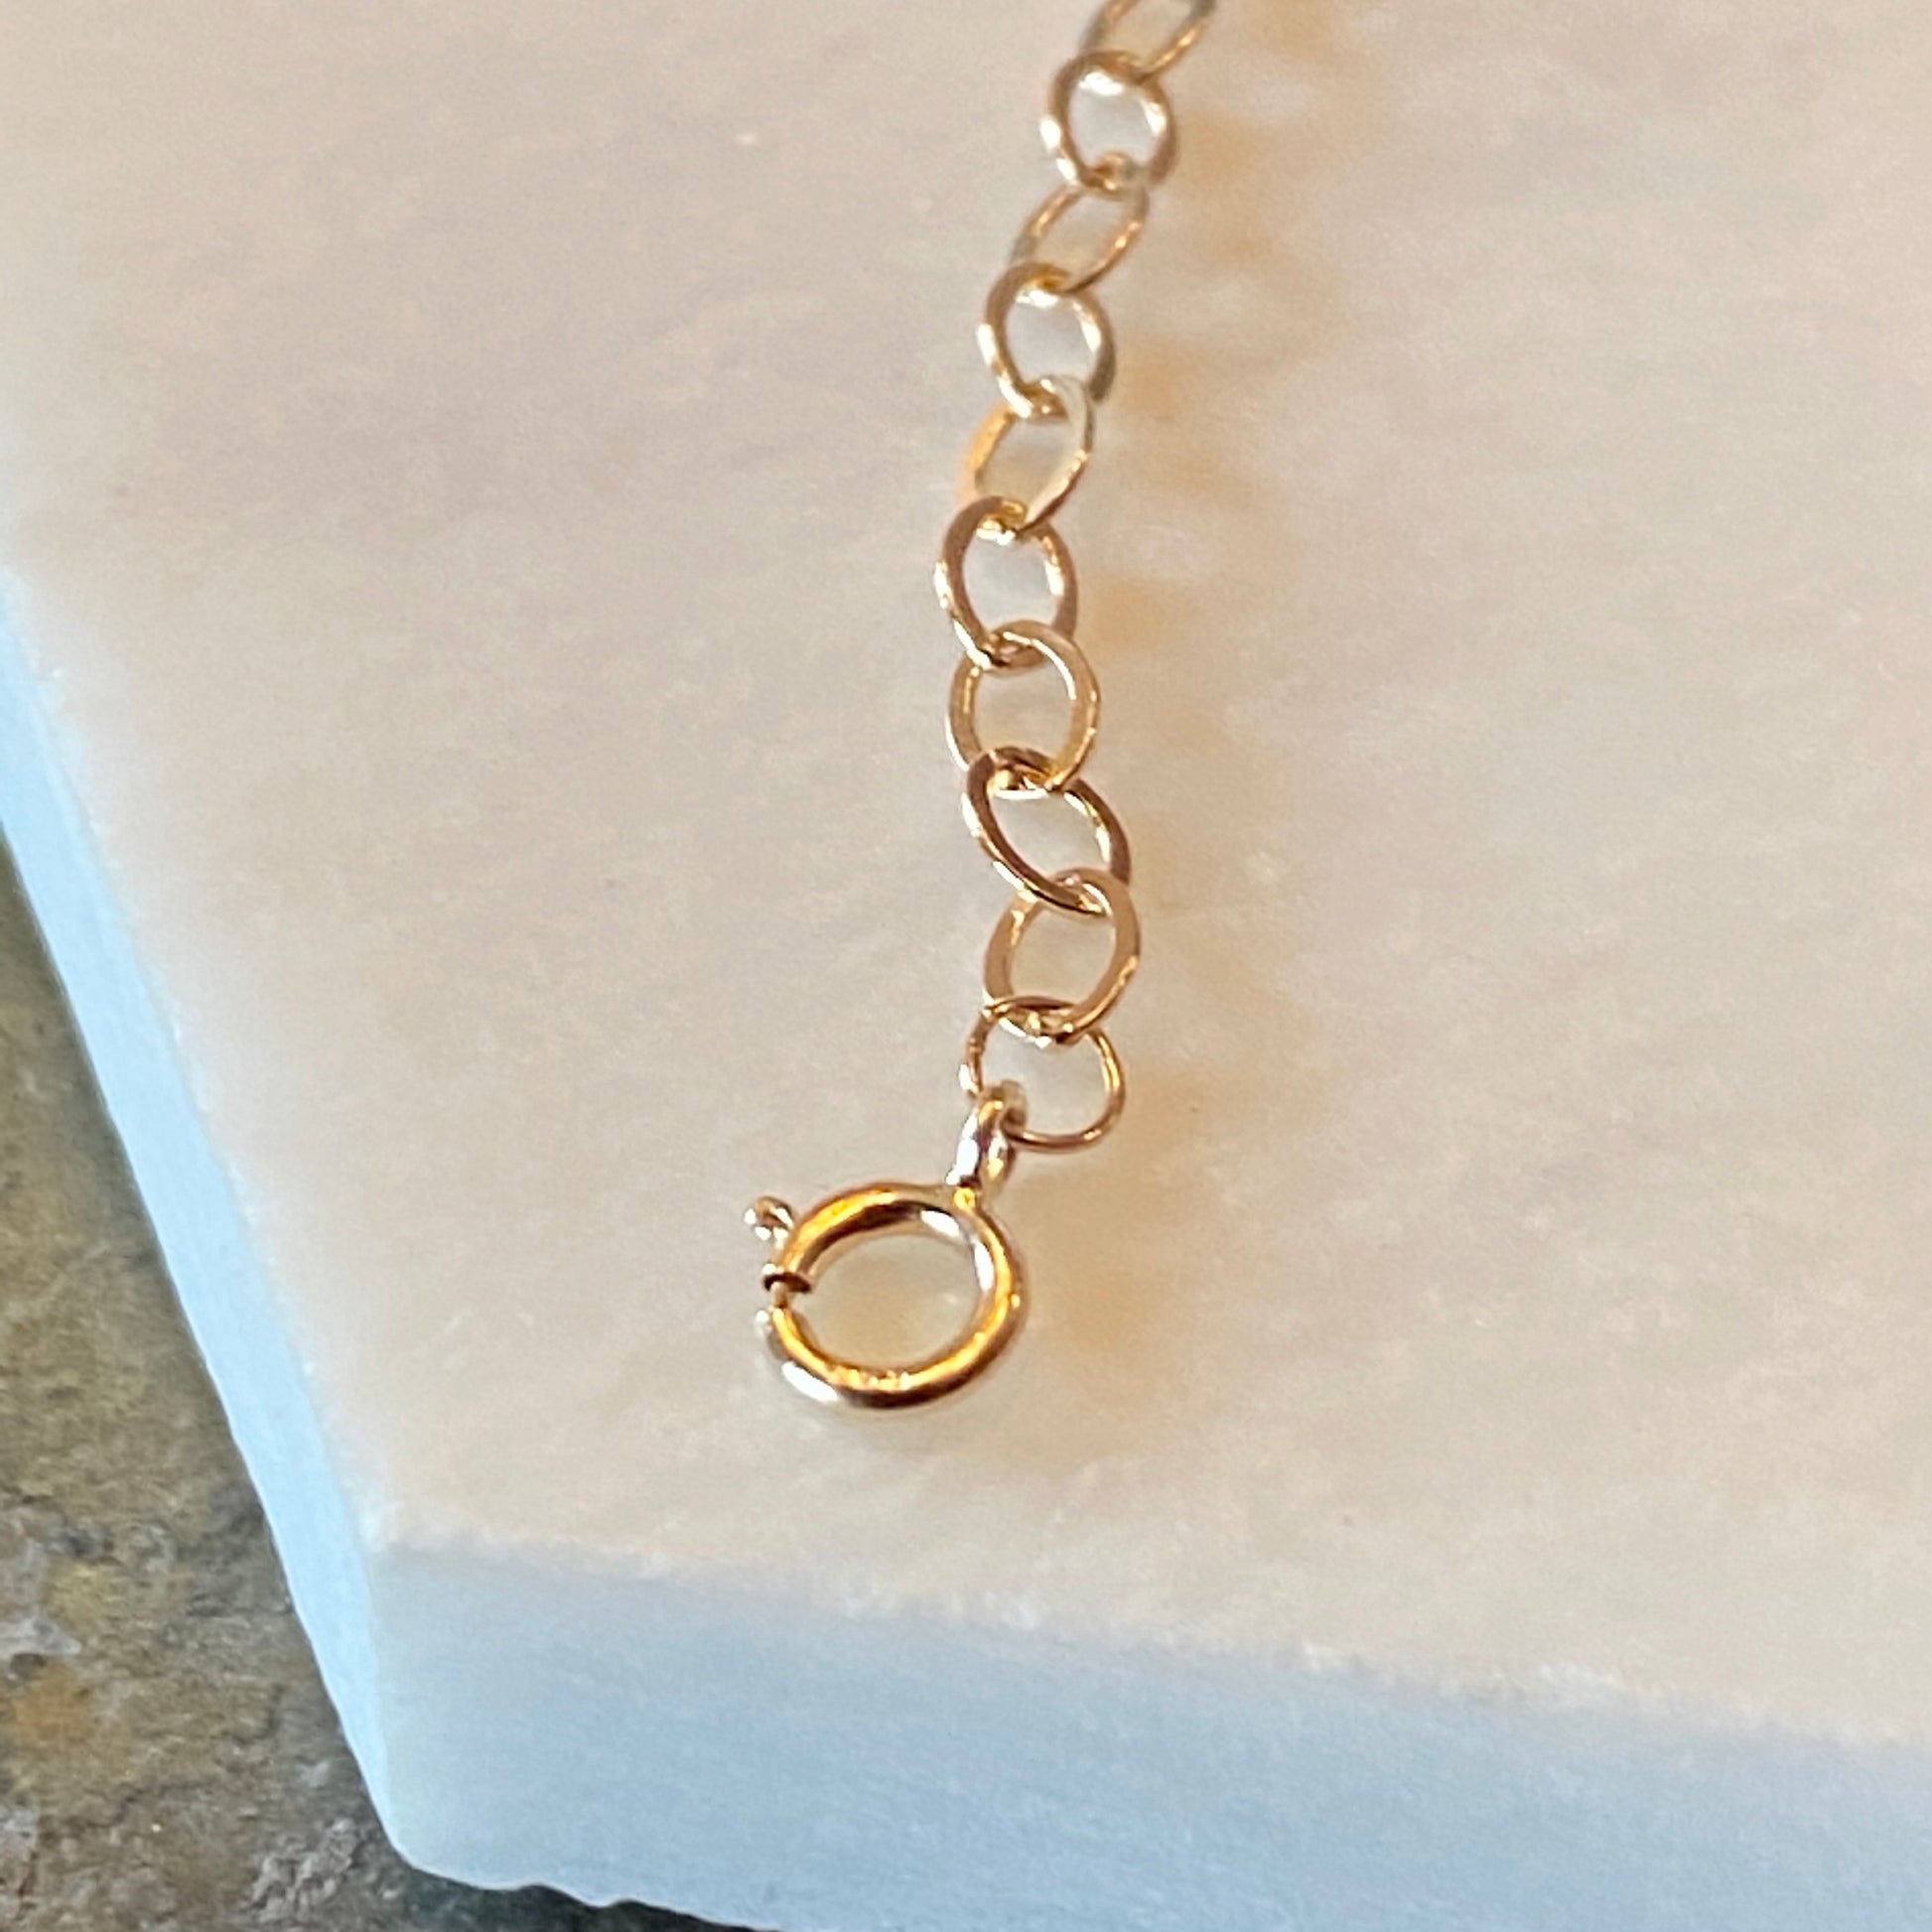 14KT Yellow Gold Open Cable Link Necklace Chain Extender/ Safety Chain 2"/ 3mm, 14KT Yellow Gold Open Cable Link Necklace Chain Extender/ Safety Chain 2"/ 3mm - Legacy Saint Jewelry